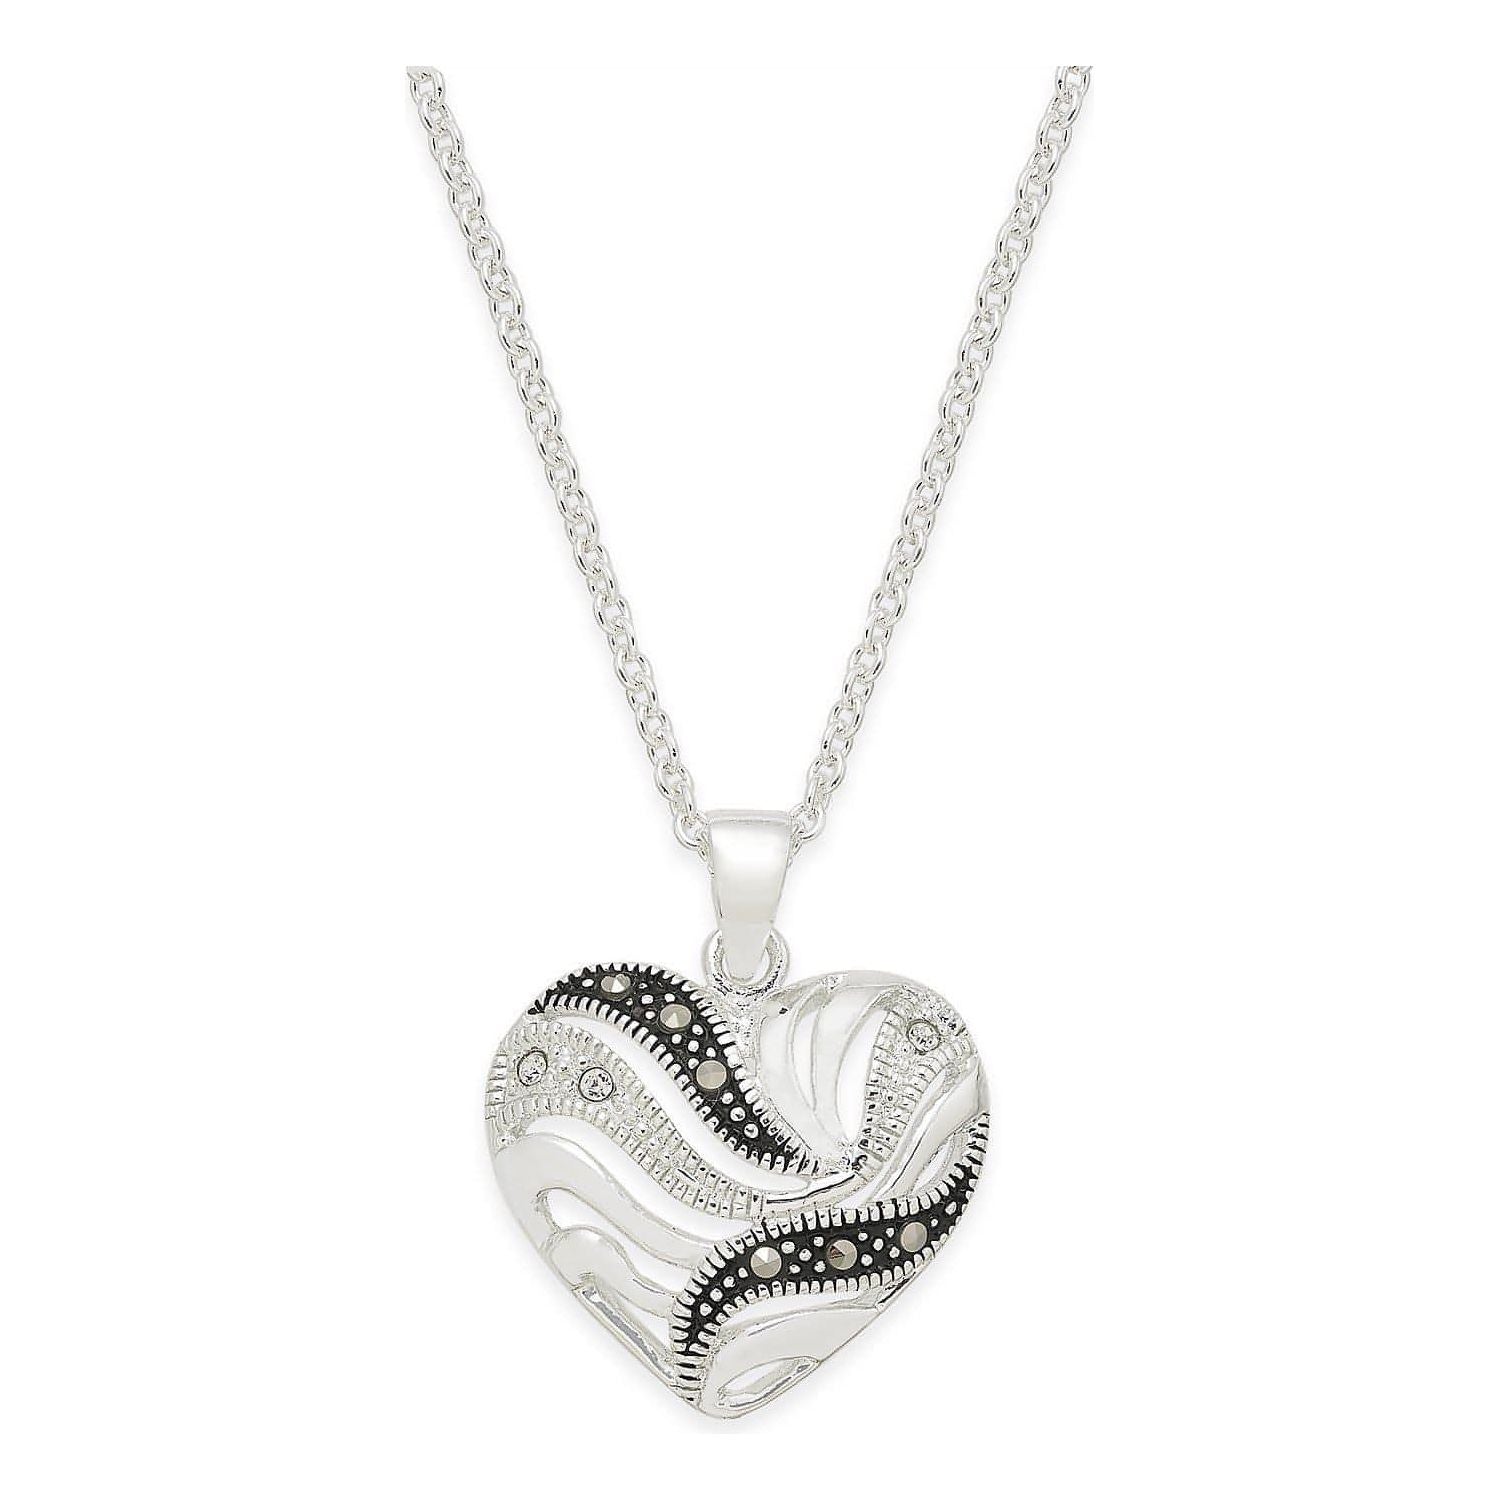 Marcasite and Crystal Heart Pendant Necklace in Silver-Plate - Brandat Outlet, Women's Handbags Outlet ,Handbags Online Outlet | Brands Outlet | Brandat Outlet | Designer Handbags Online |